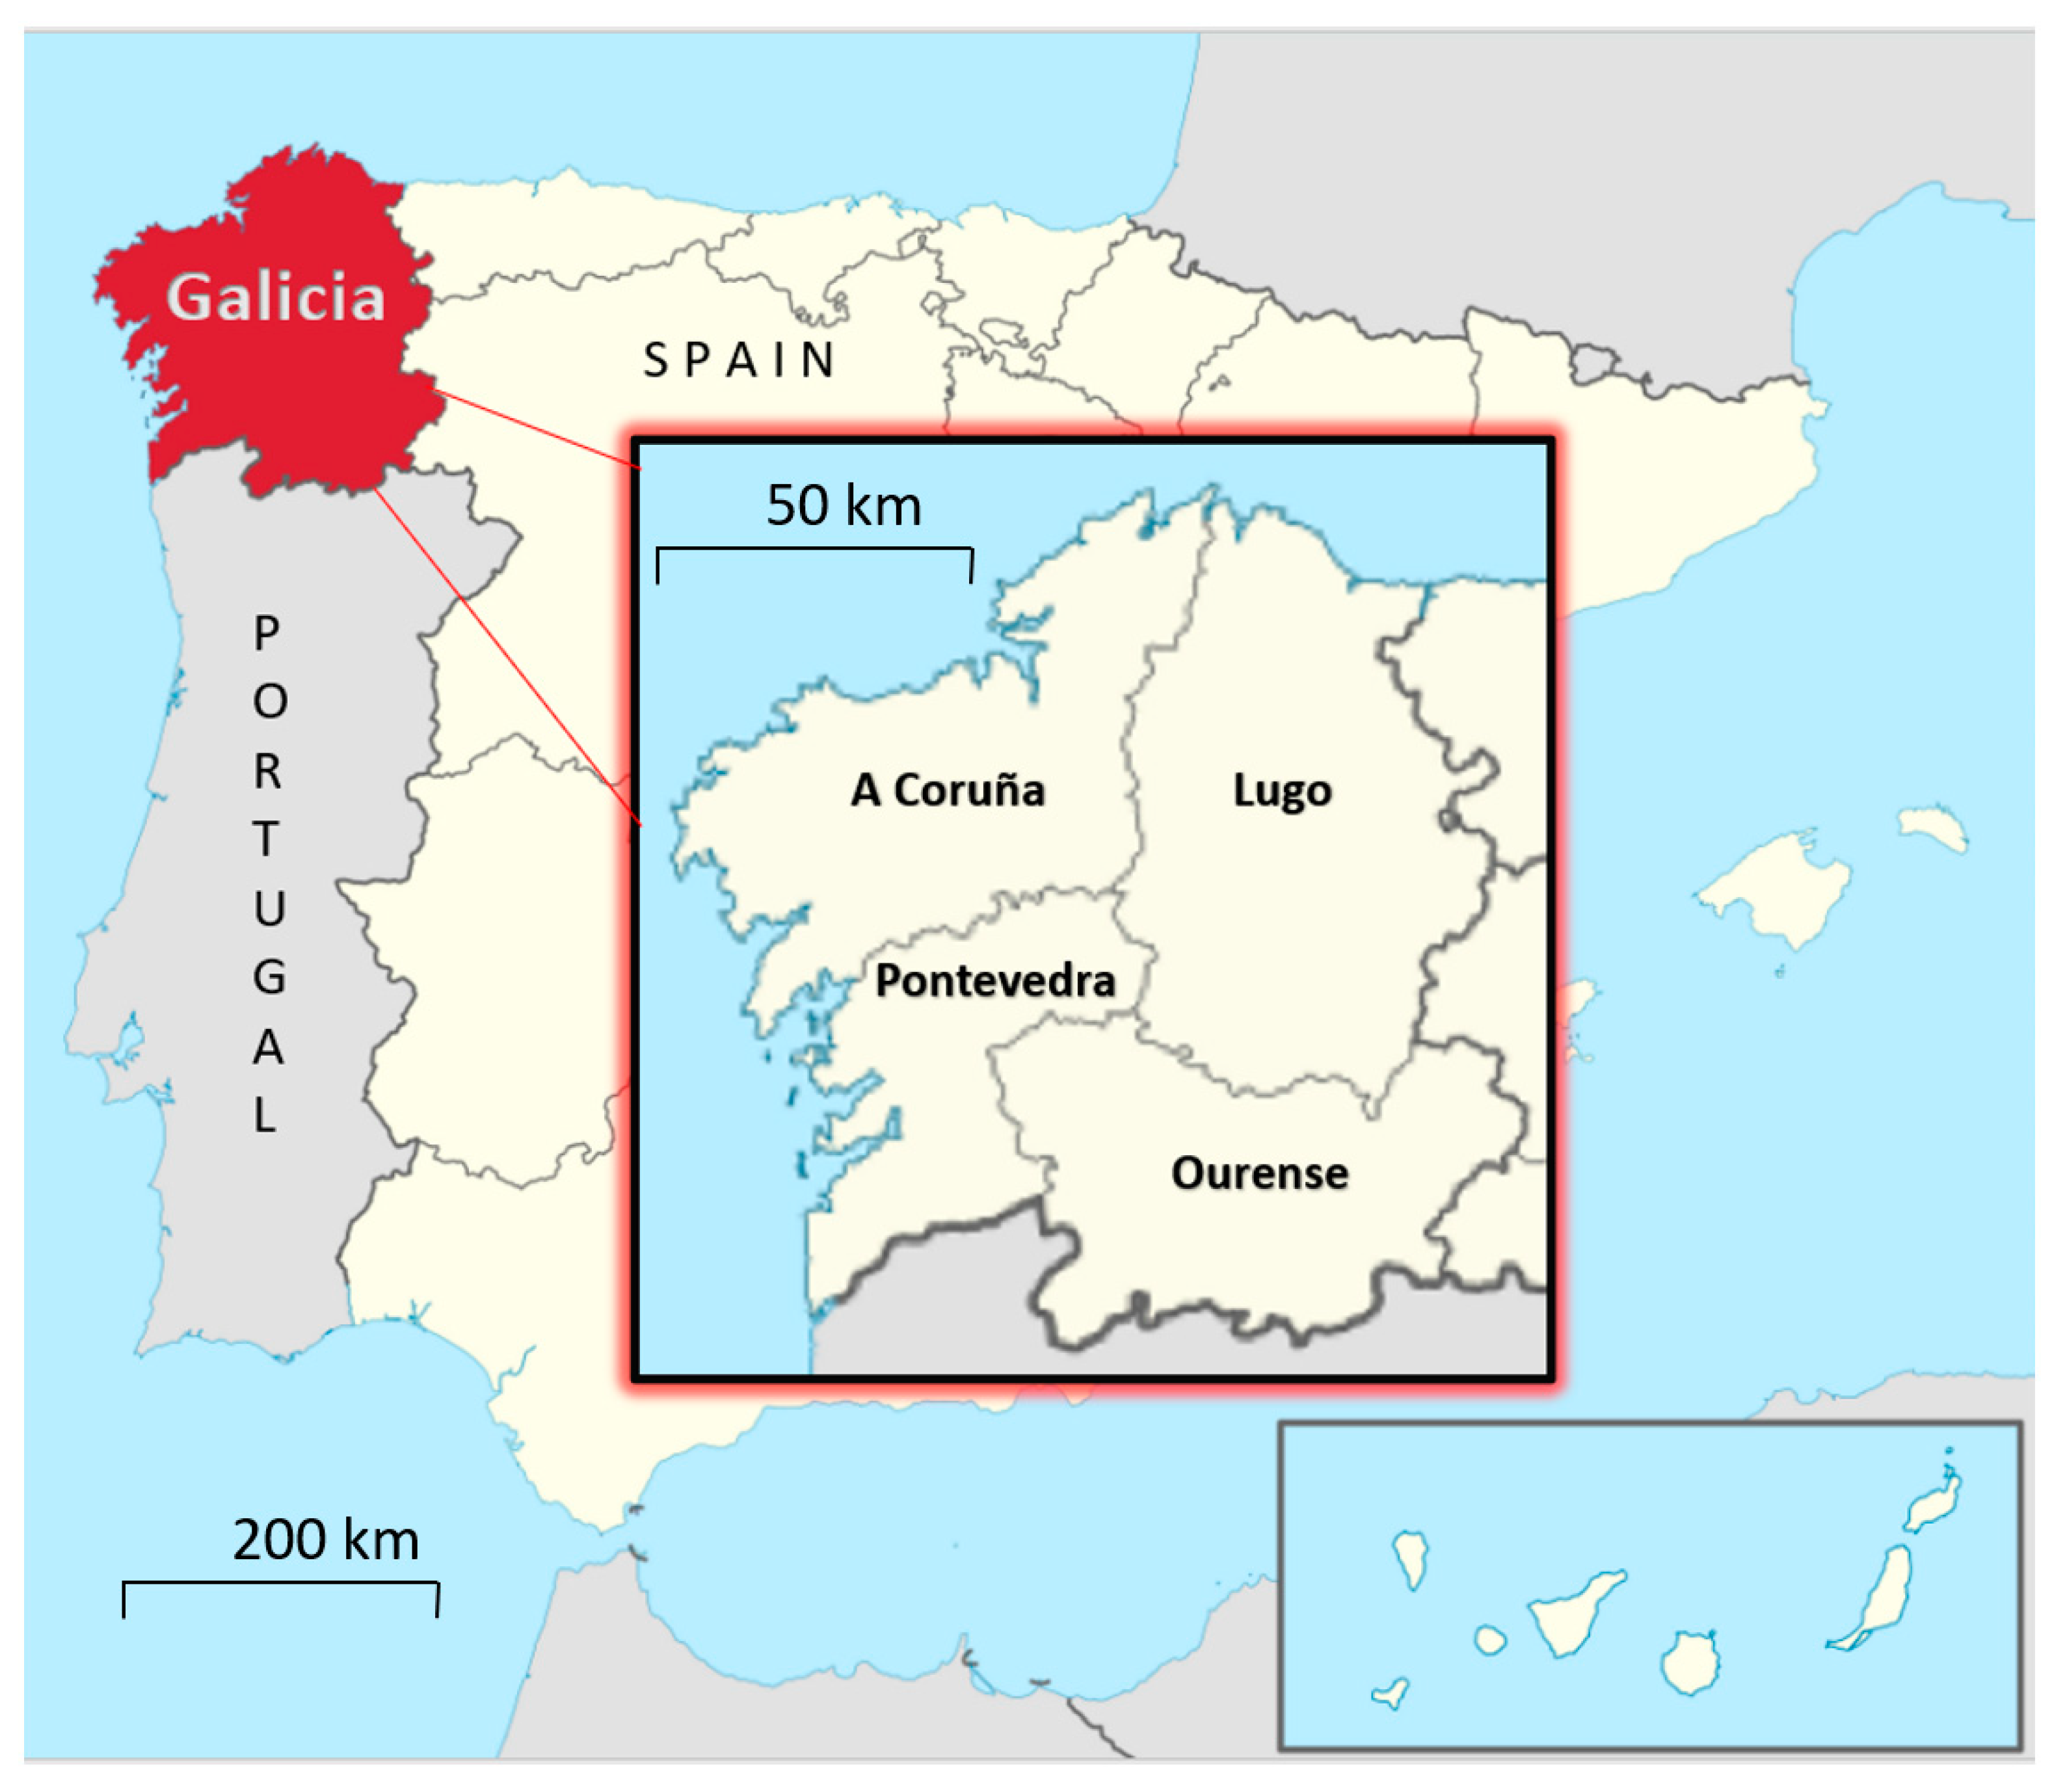 Energies | Free Full-Text | Forest Management Communities’  Participation in Bioenergy Production Initiatives: A Case Study for Galicia  (Spain)